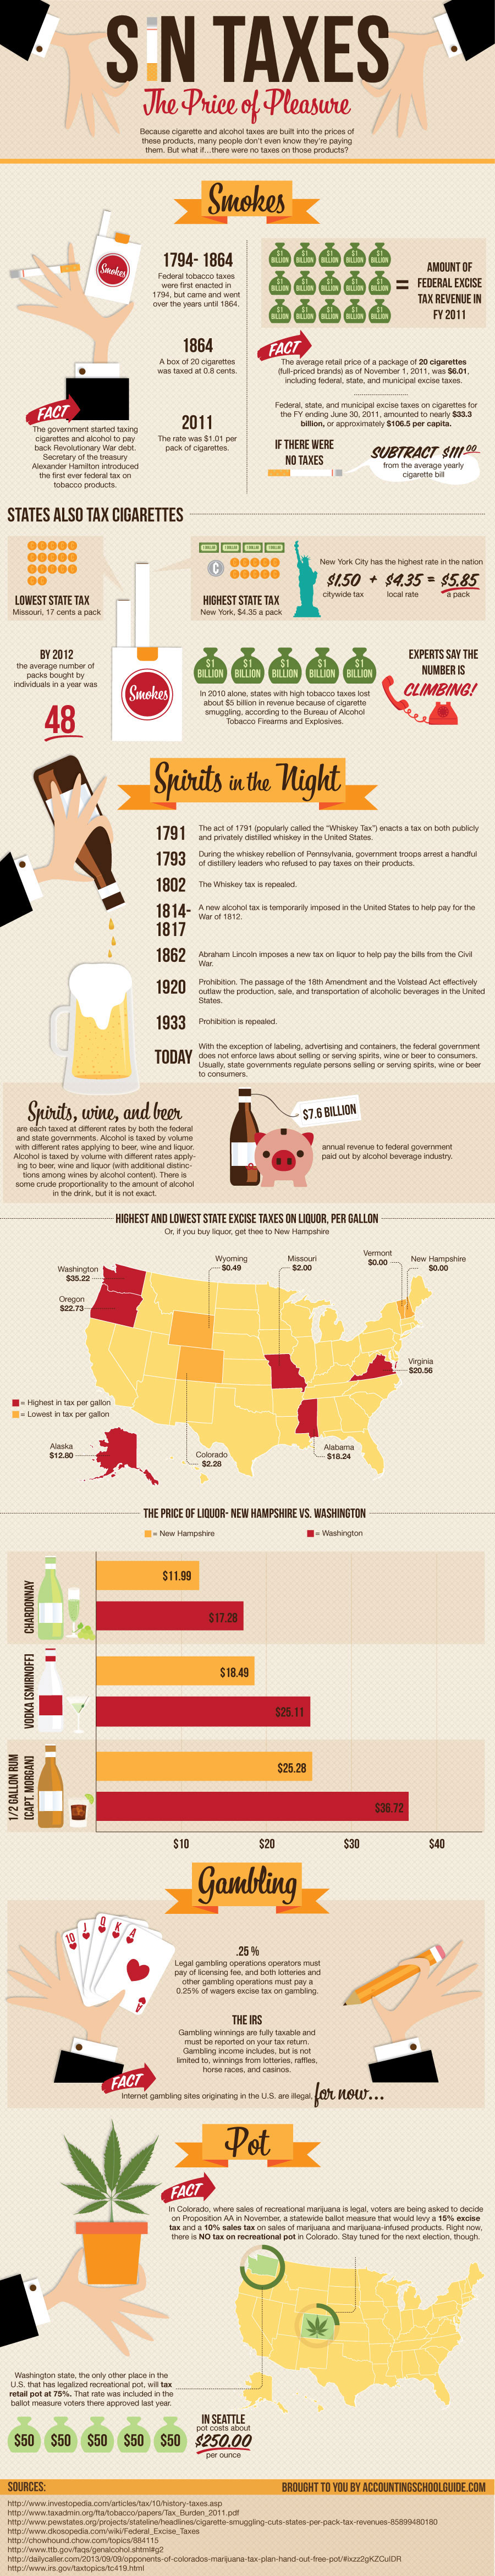 Excise Tax in US History-Infographic